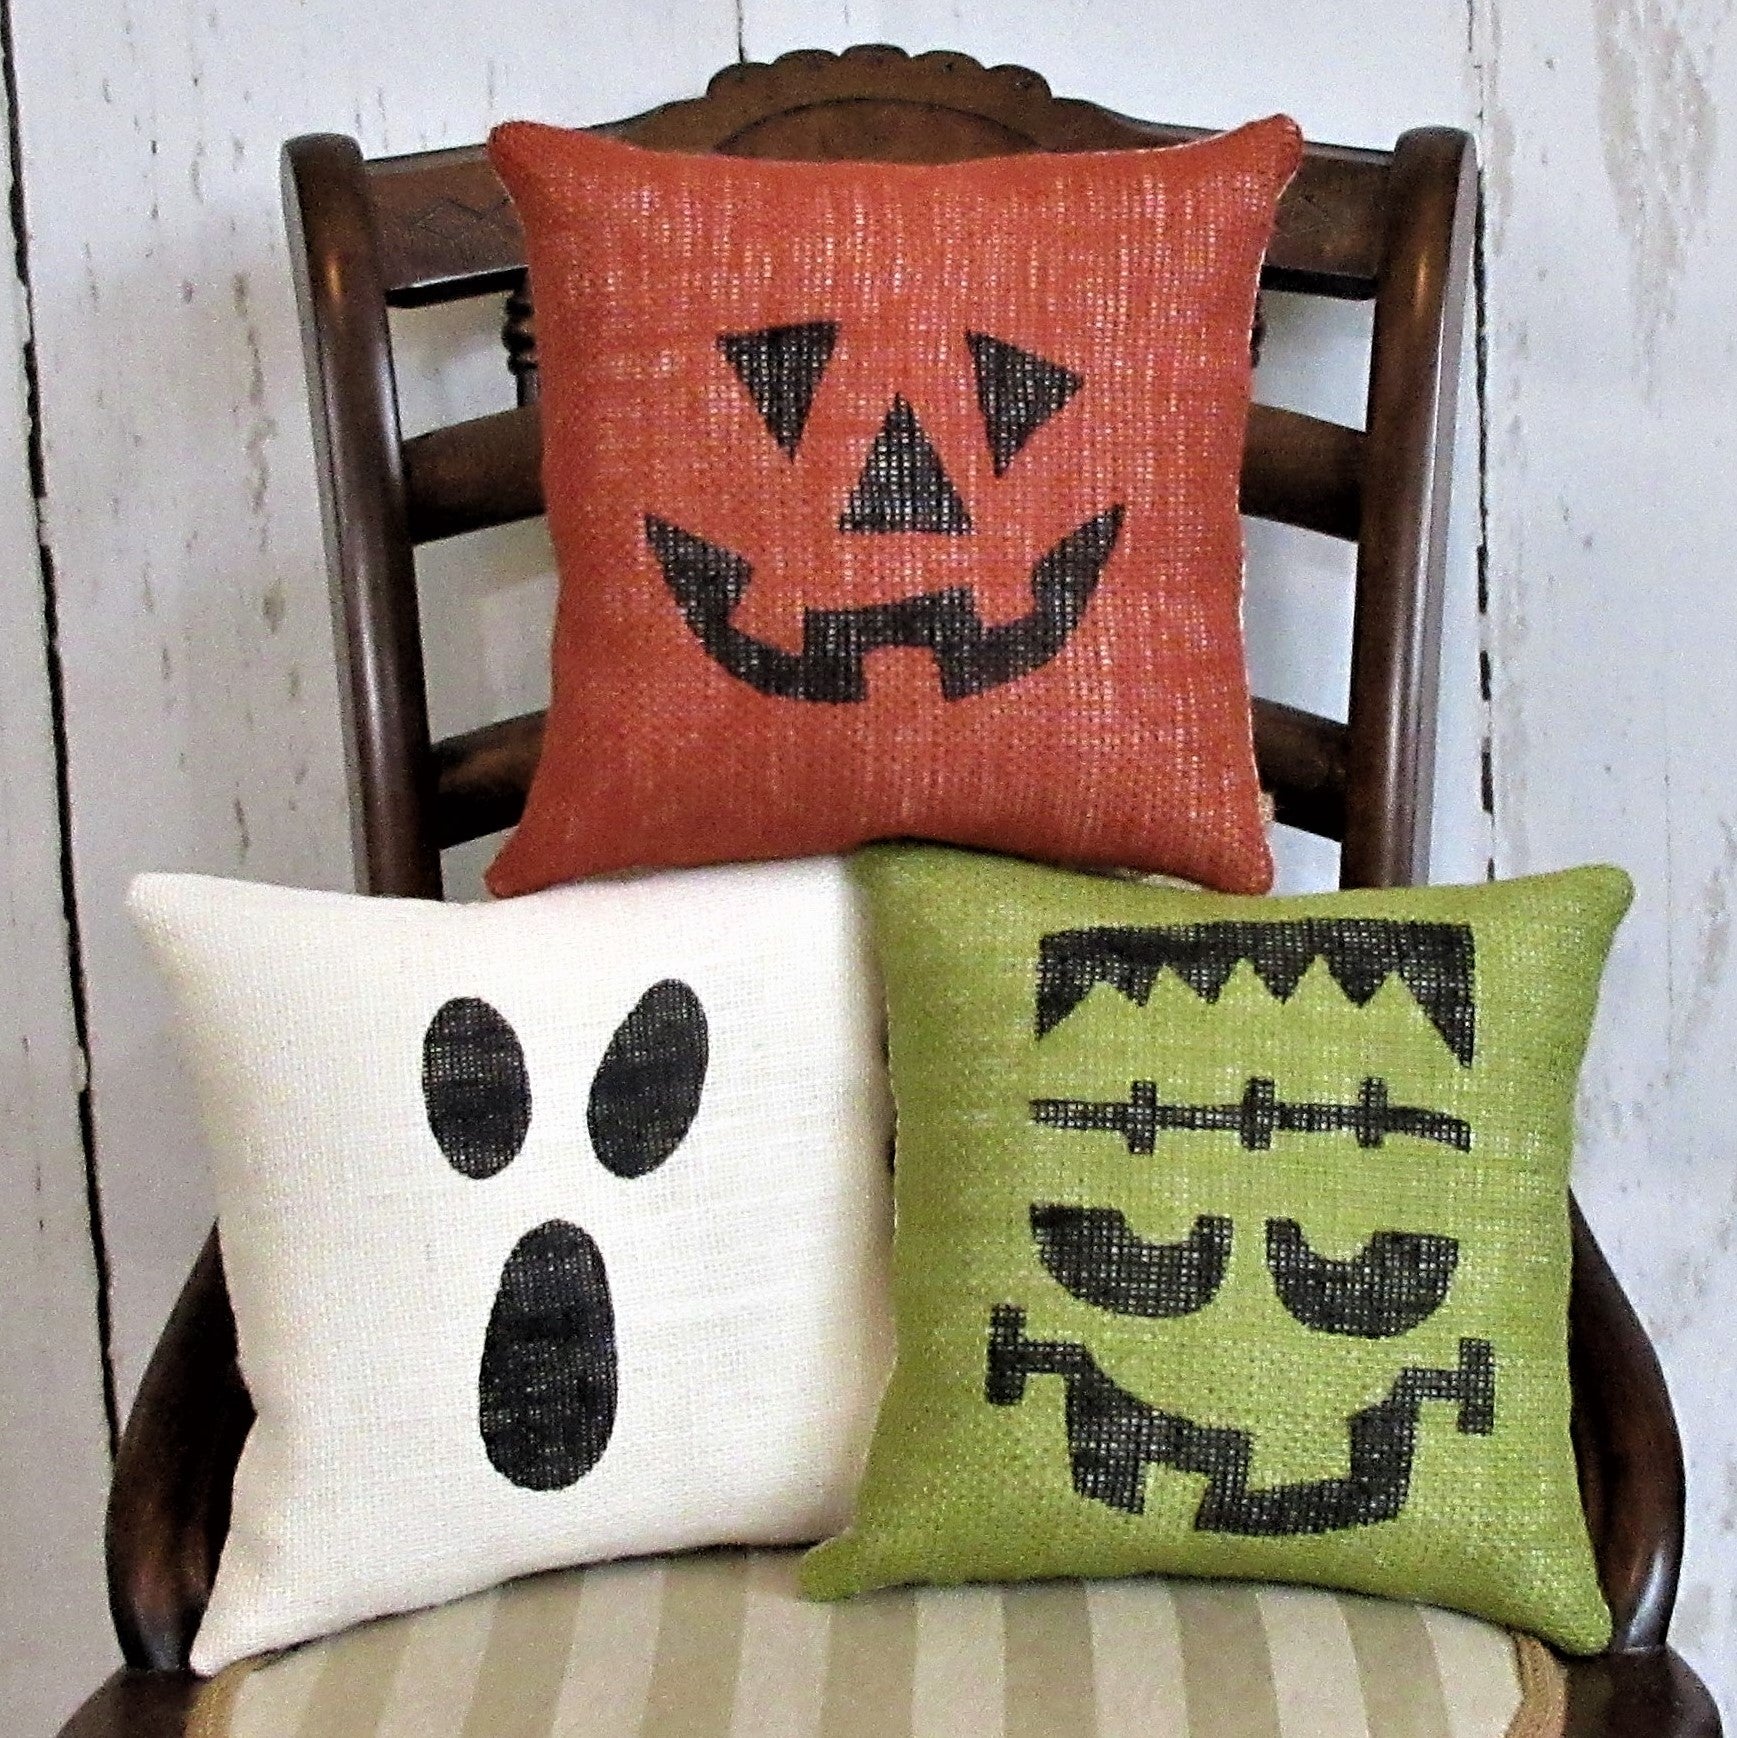 12 Orange Decorative Halloween Pillow with Black and White Embroidery